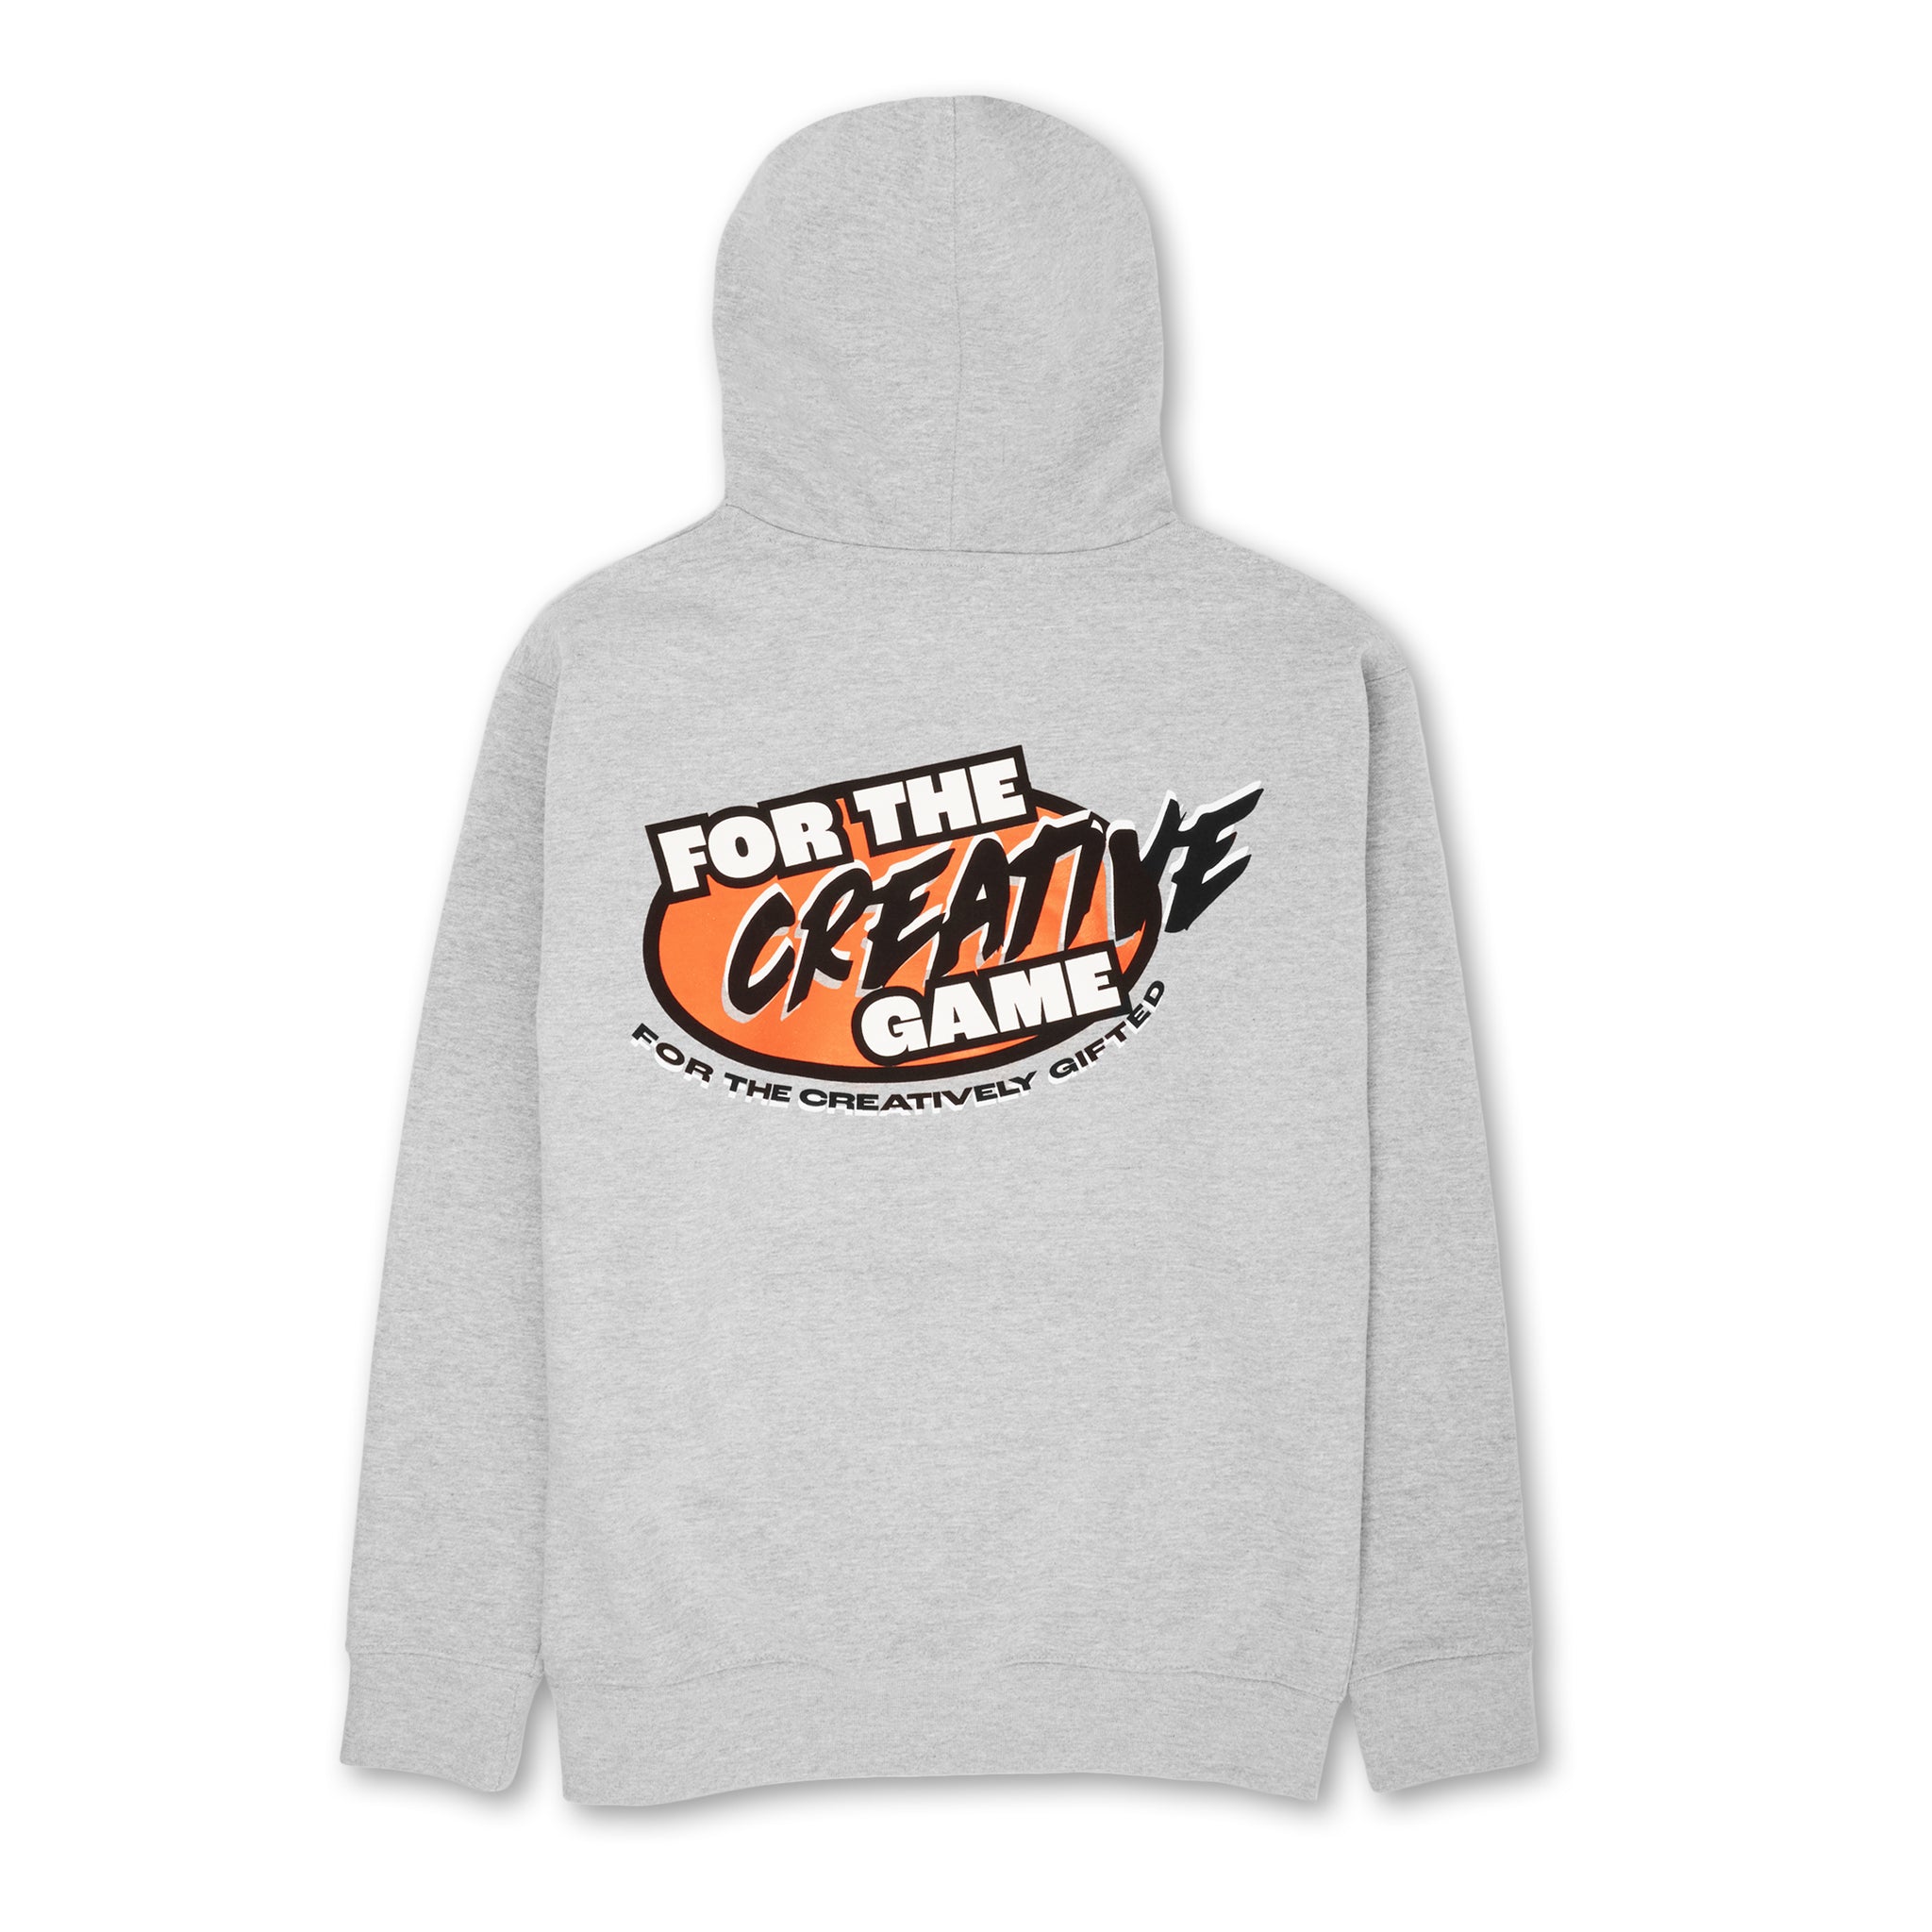 For The Creative Game Hoodie